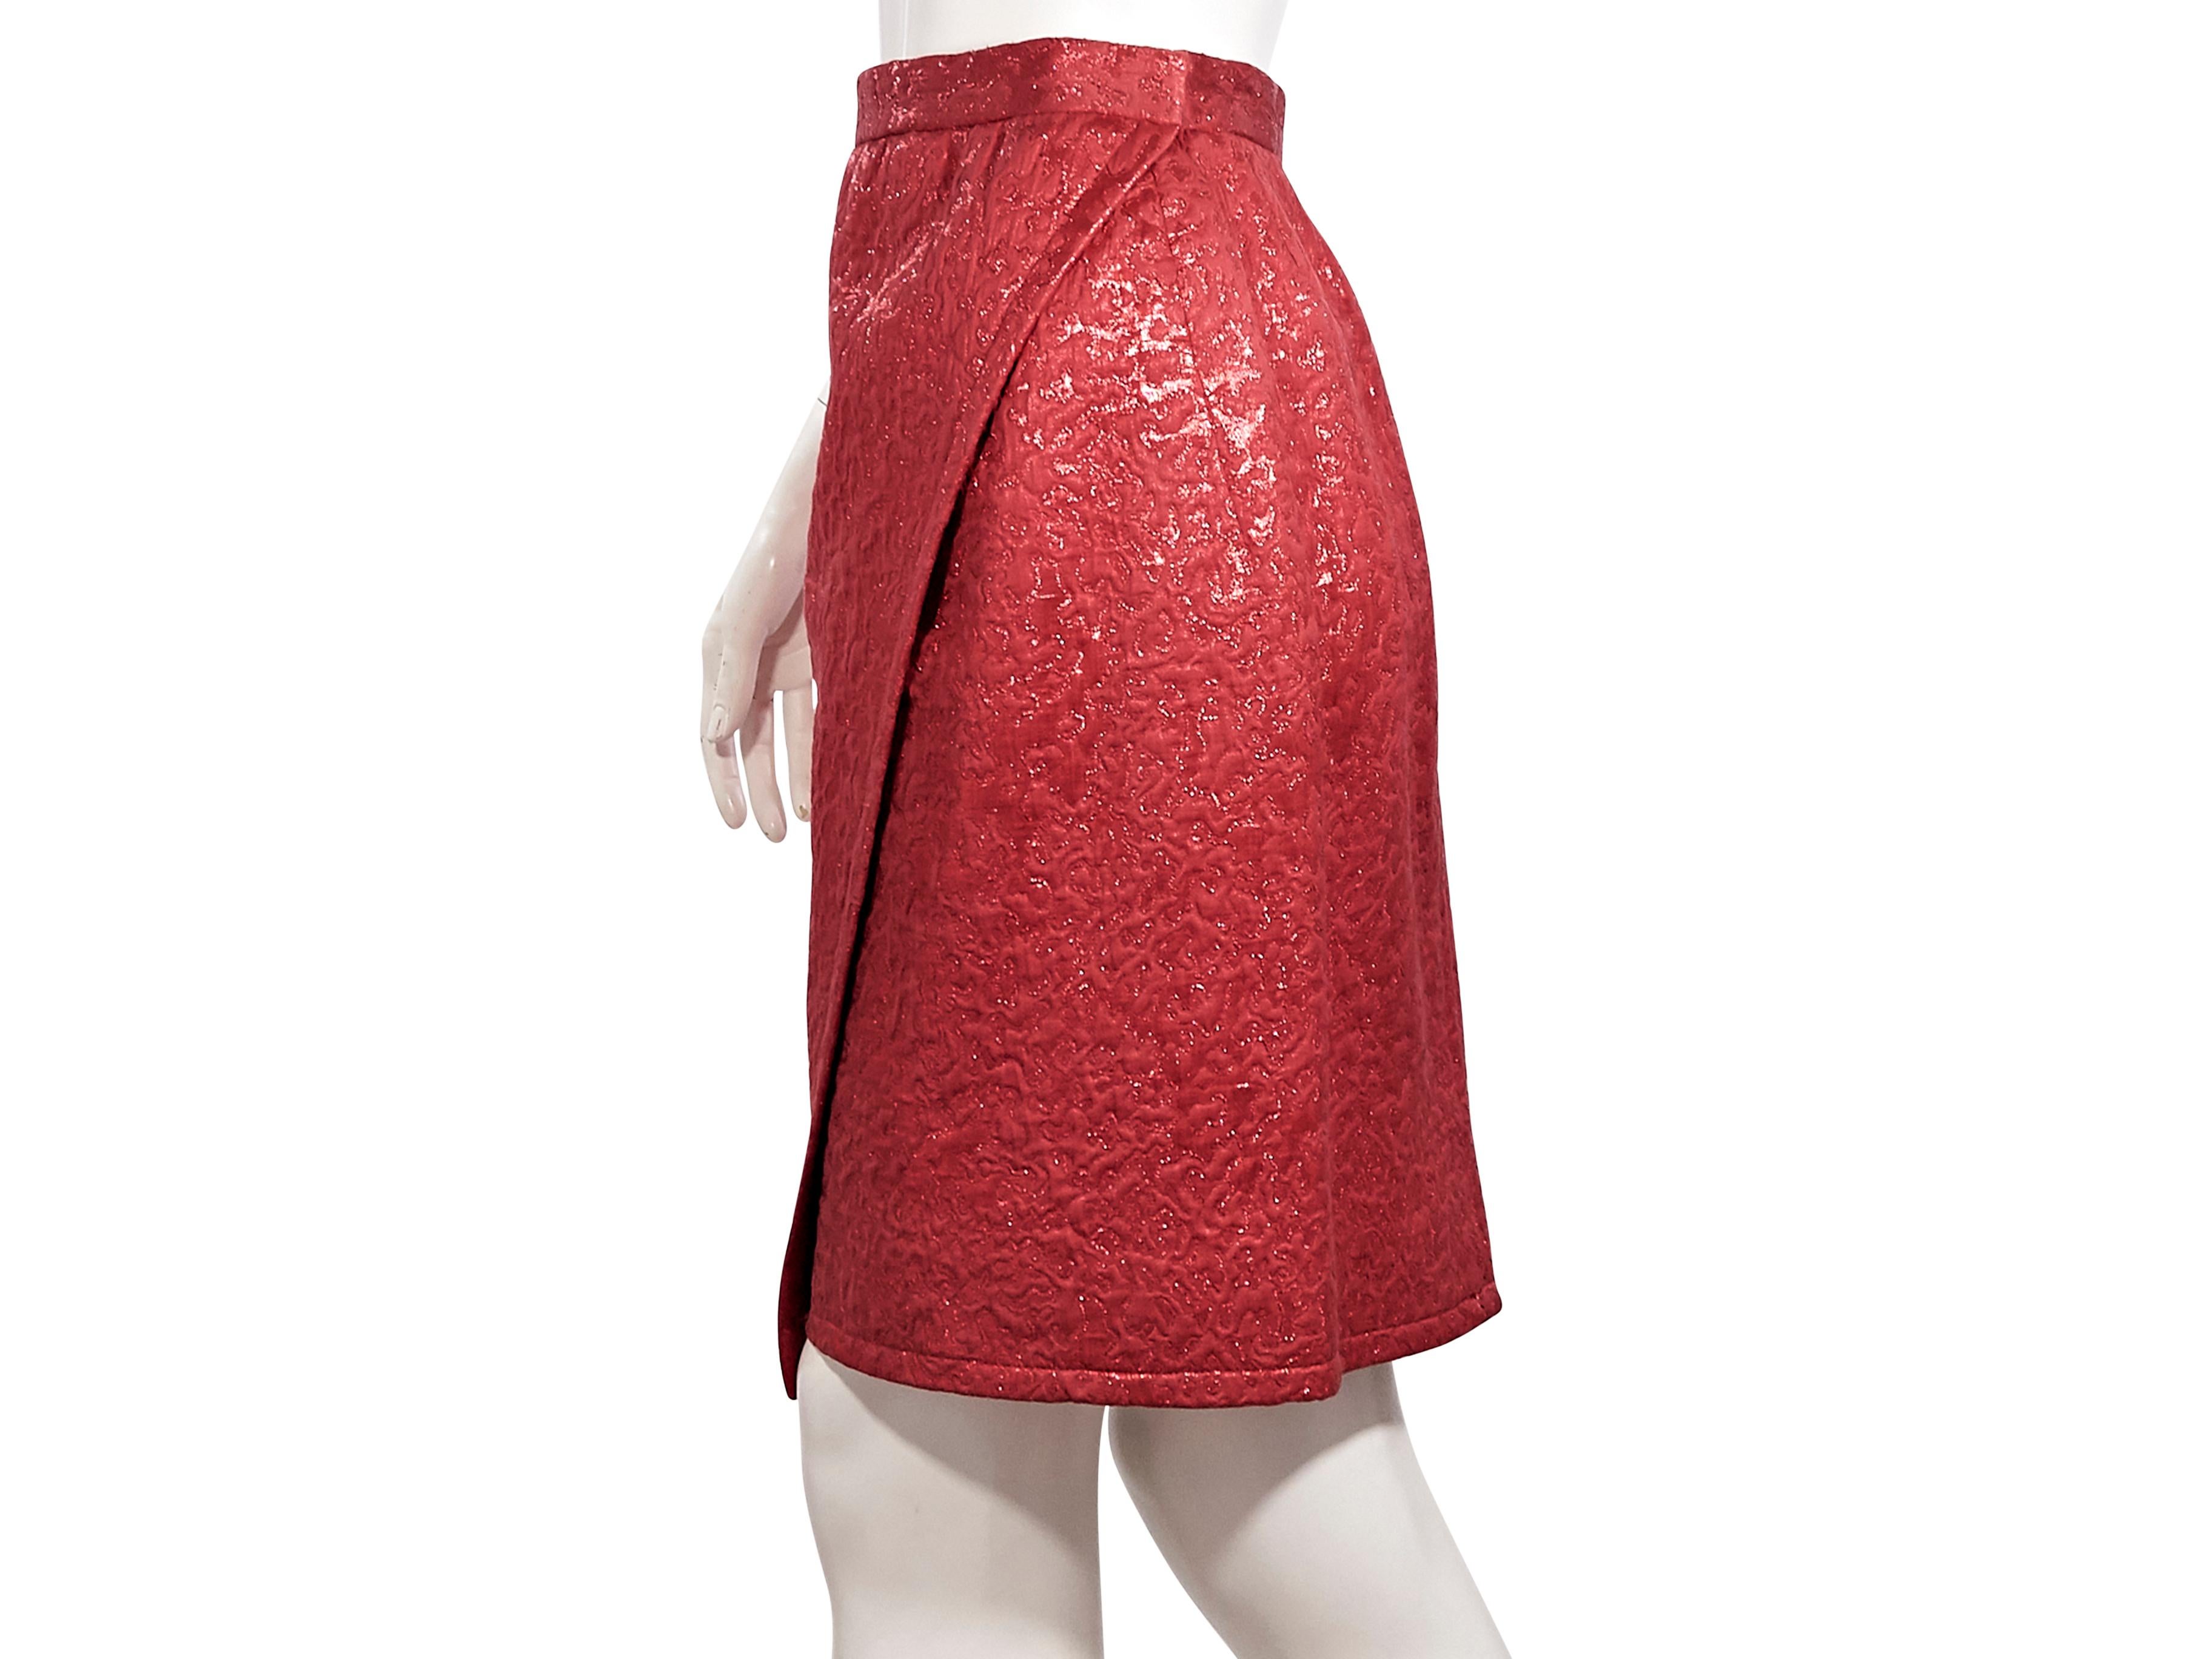 Product details:  Vintage metallic red brocade wrap skirt by Yves Saint Laurent.  Circa the 1970s/1980s.  Banded waist.  Concealed hook closure.  Label size FR 40.  26